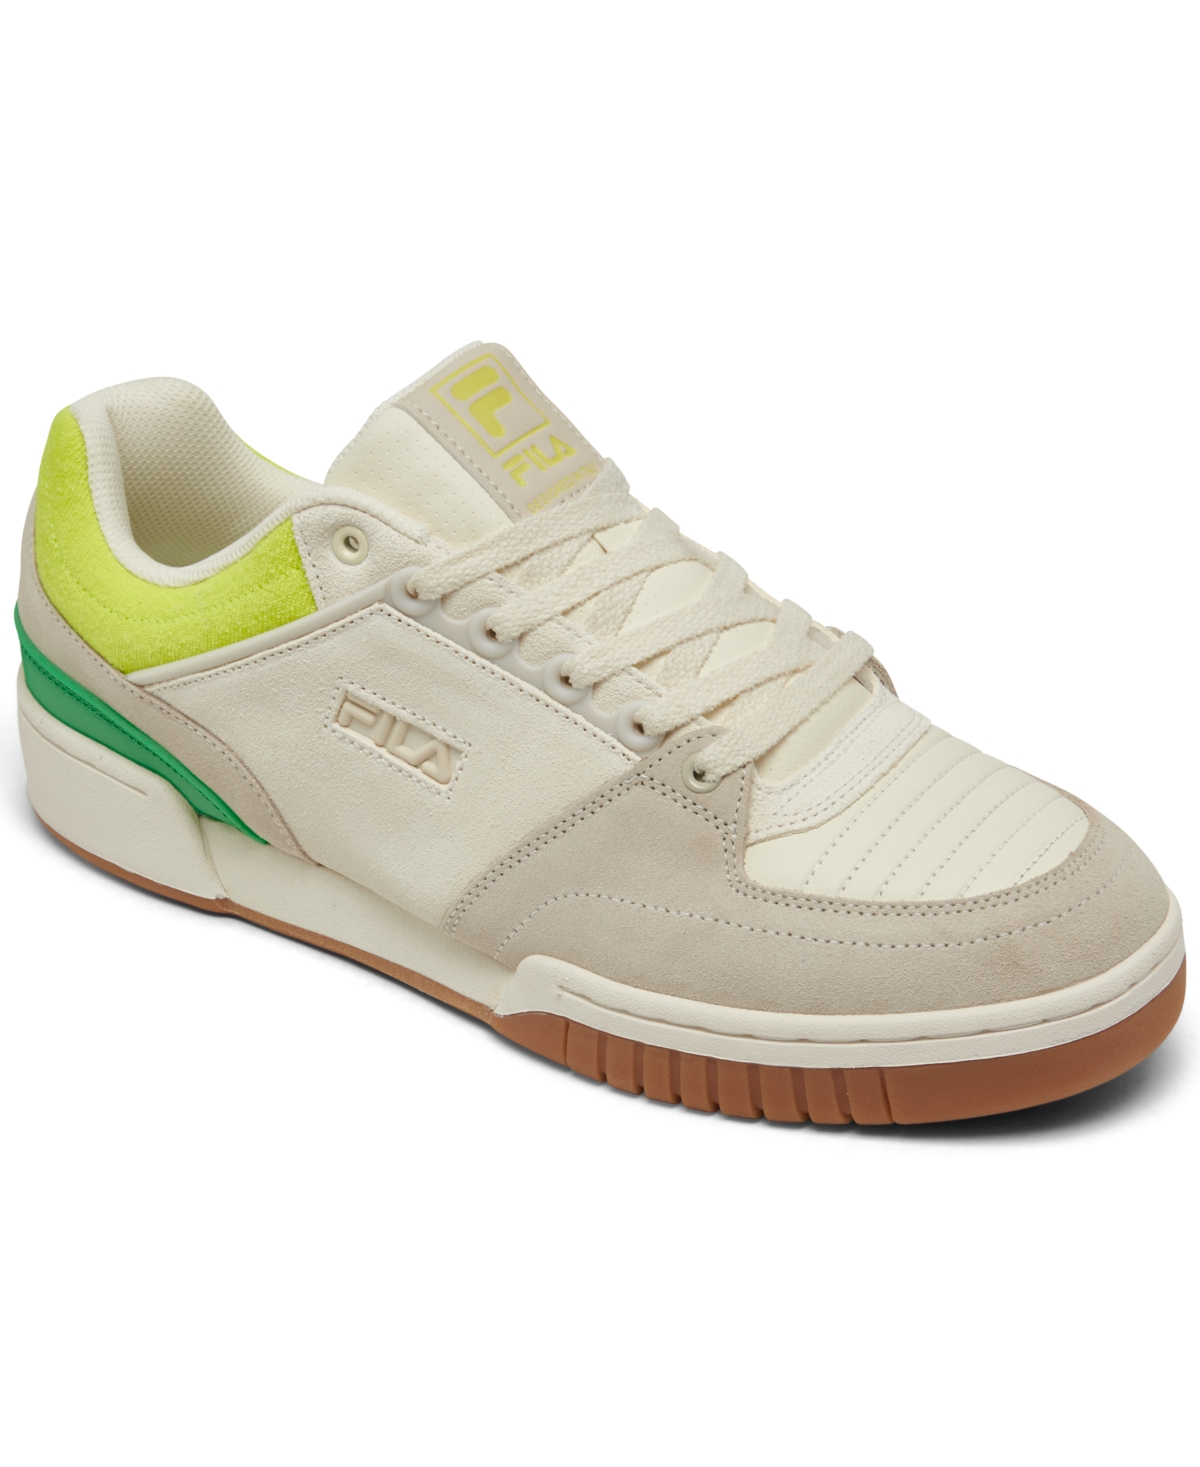 Fila Men's Targa Nt Palm Beach Low Casual Tennis Sneakers From Finish Line In Gold